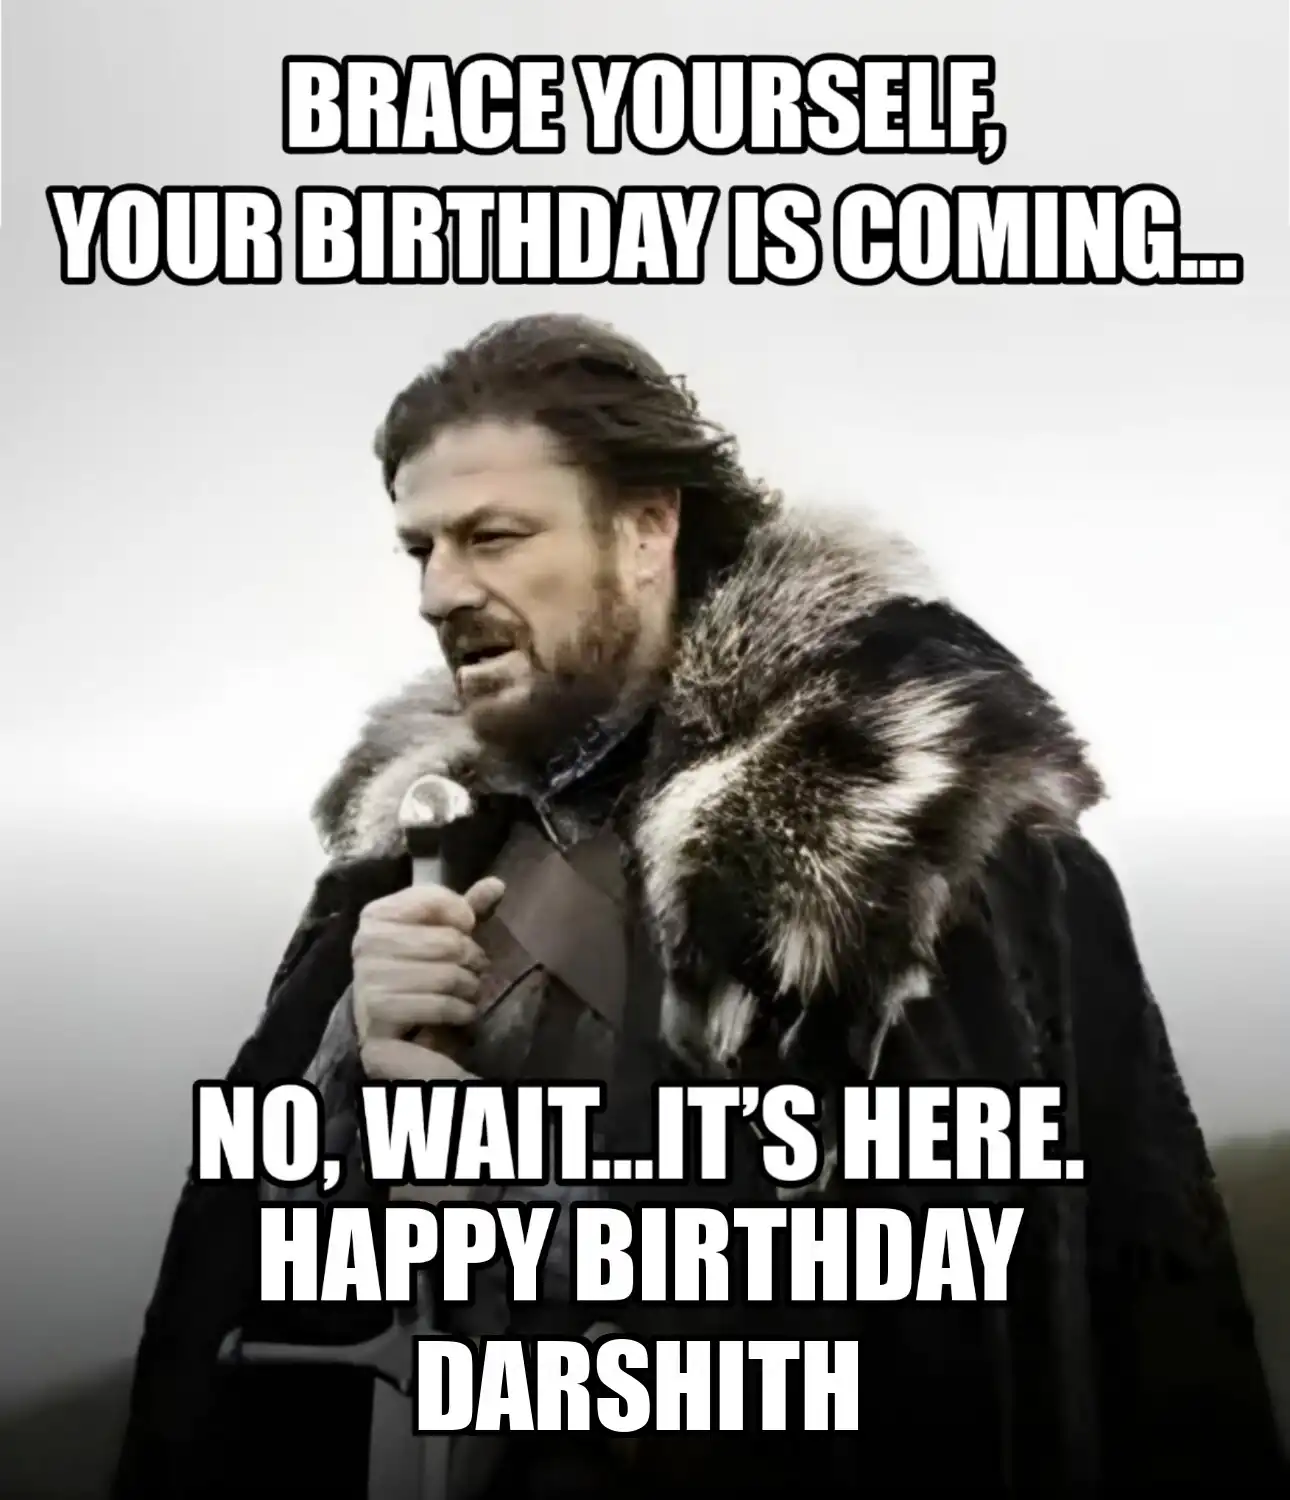 Happy Birthday Darshith Brace Yourself Your Birthday Is Coming Meme